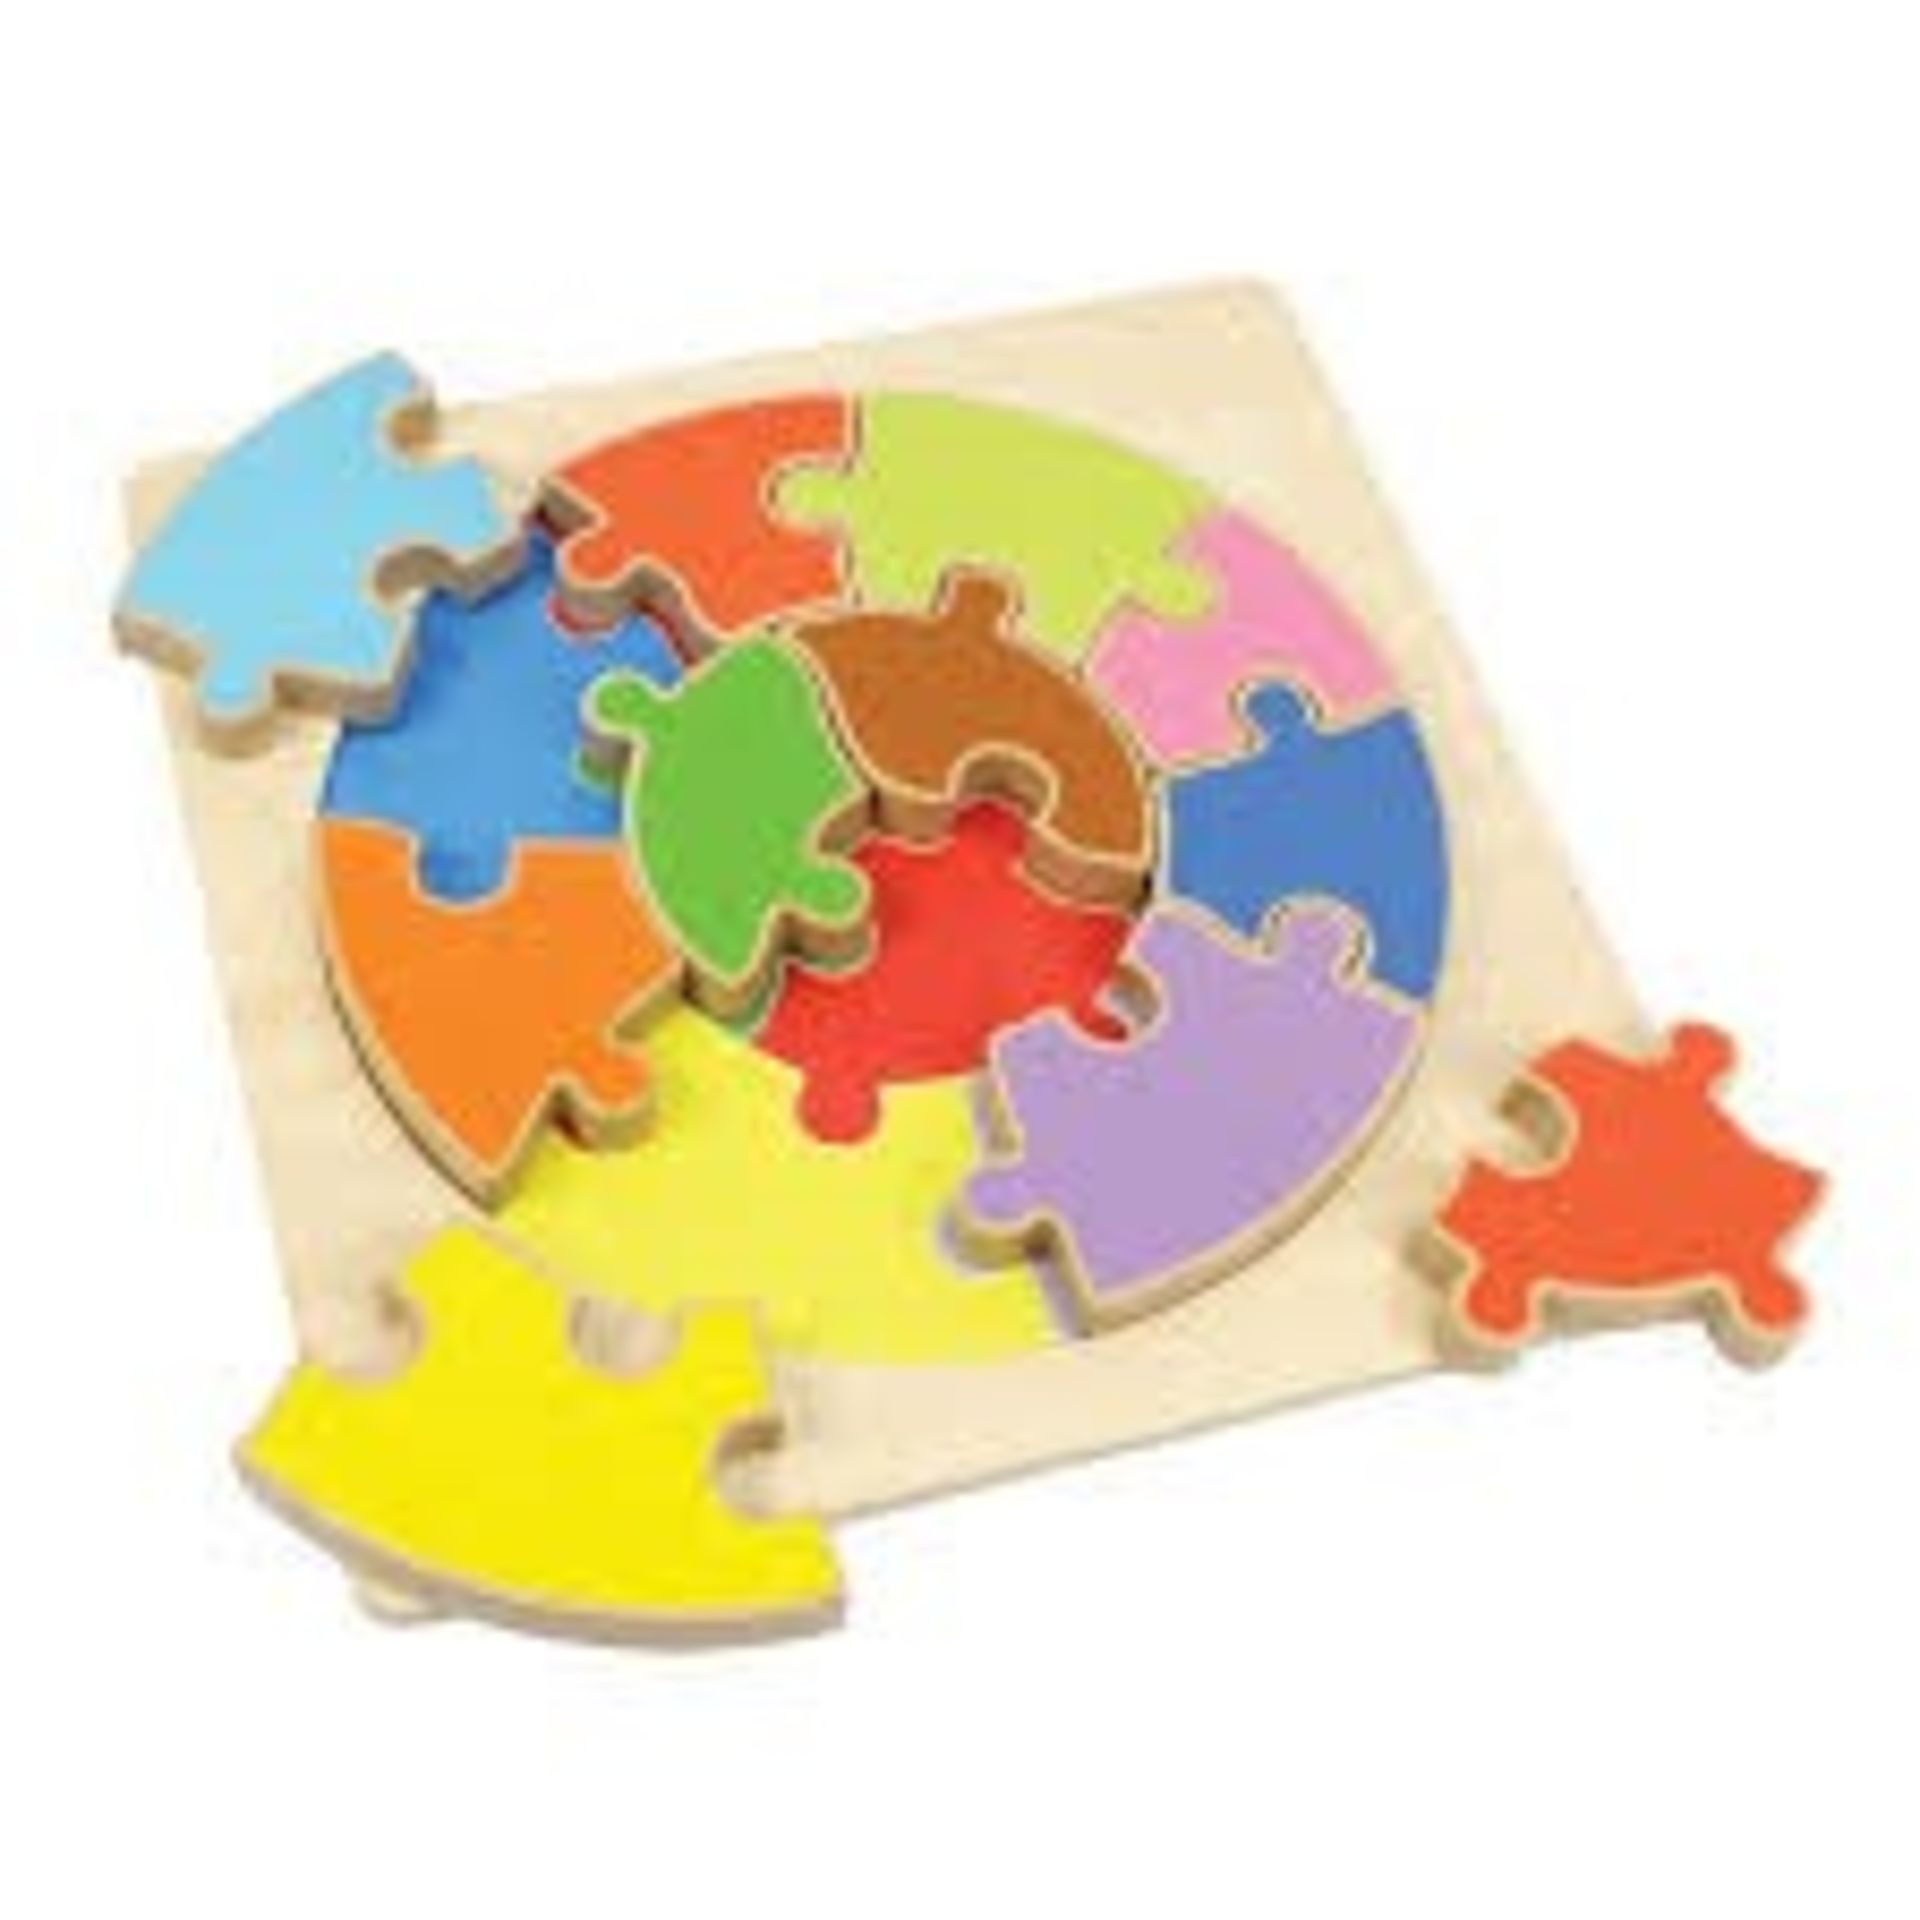 1 AS NEW BOXED MASTERKIDZ EDUCATION GIANT JIGSAW PUZZLE / RRP £117.65 (VIEWING HIGHLY RECOMMENDED)